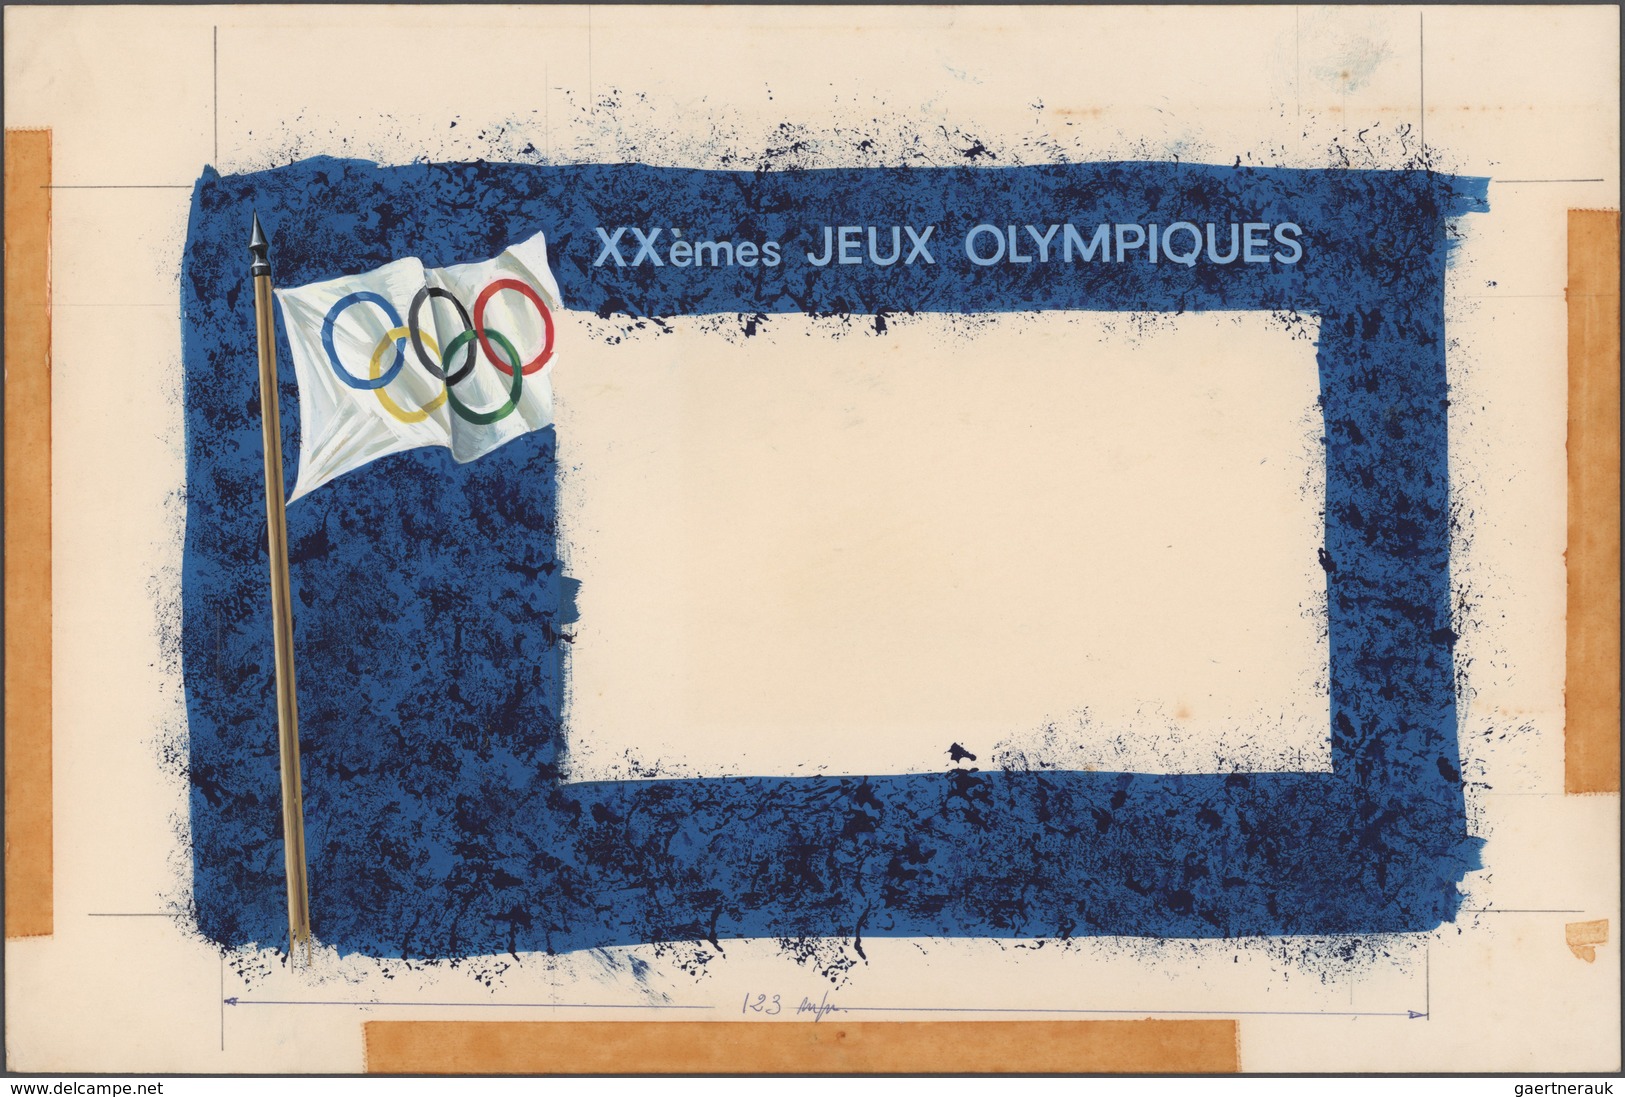 Thematik: Olympische Spiele / olympic games: 1912-1980's: Several stamps, covers and postcards, few